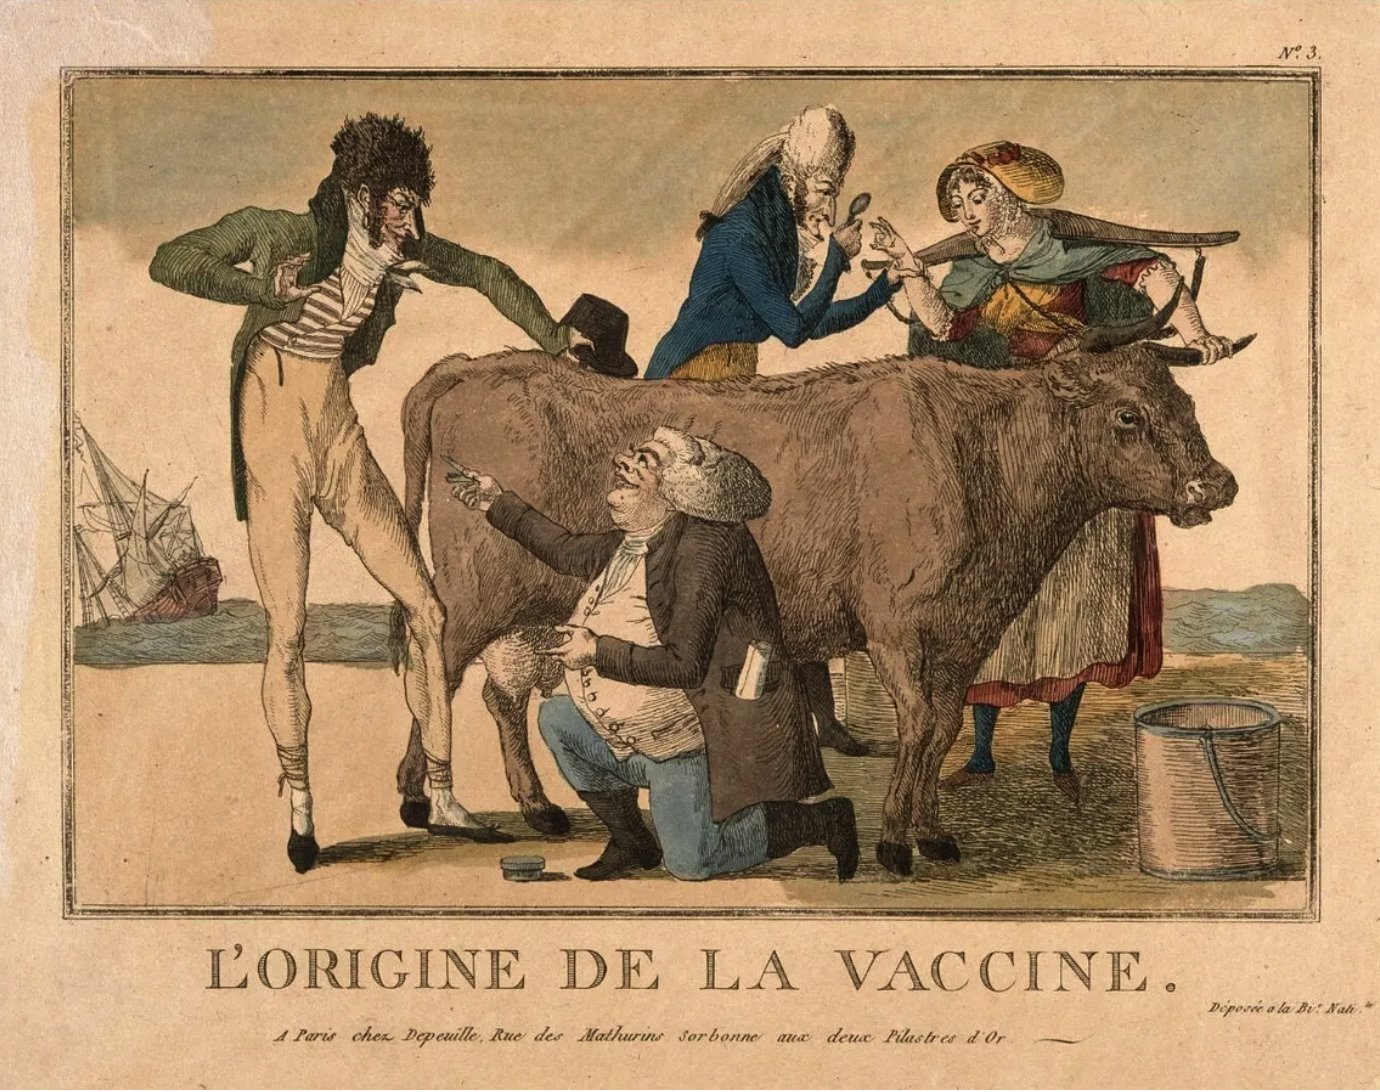 Old vaccine poster